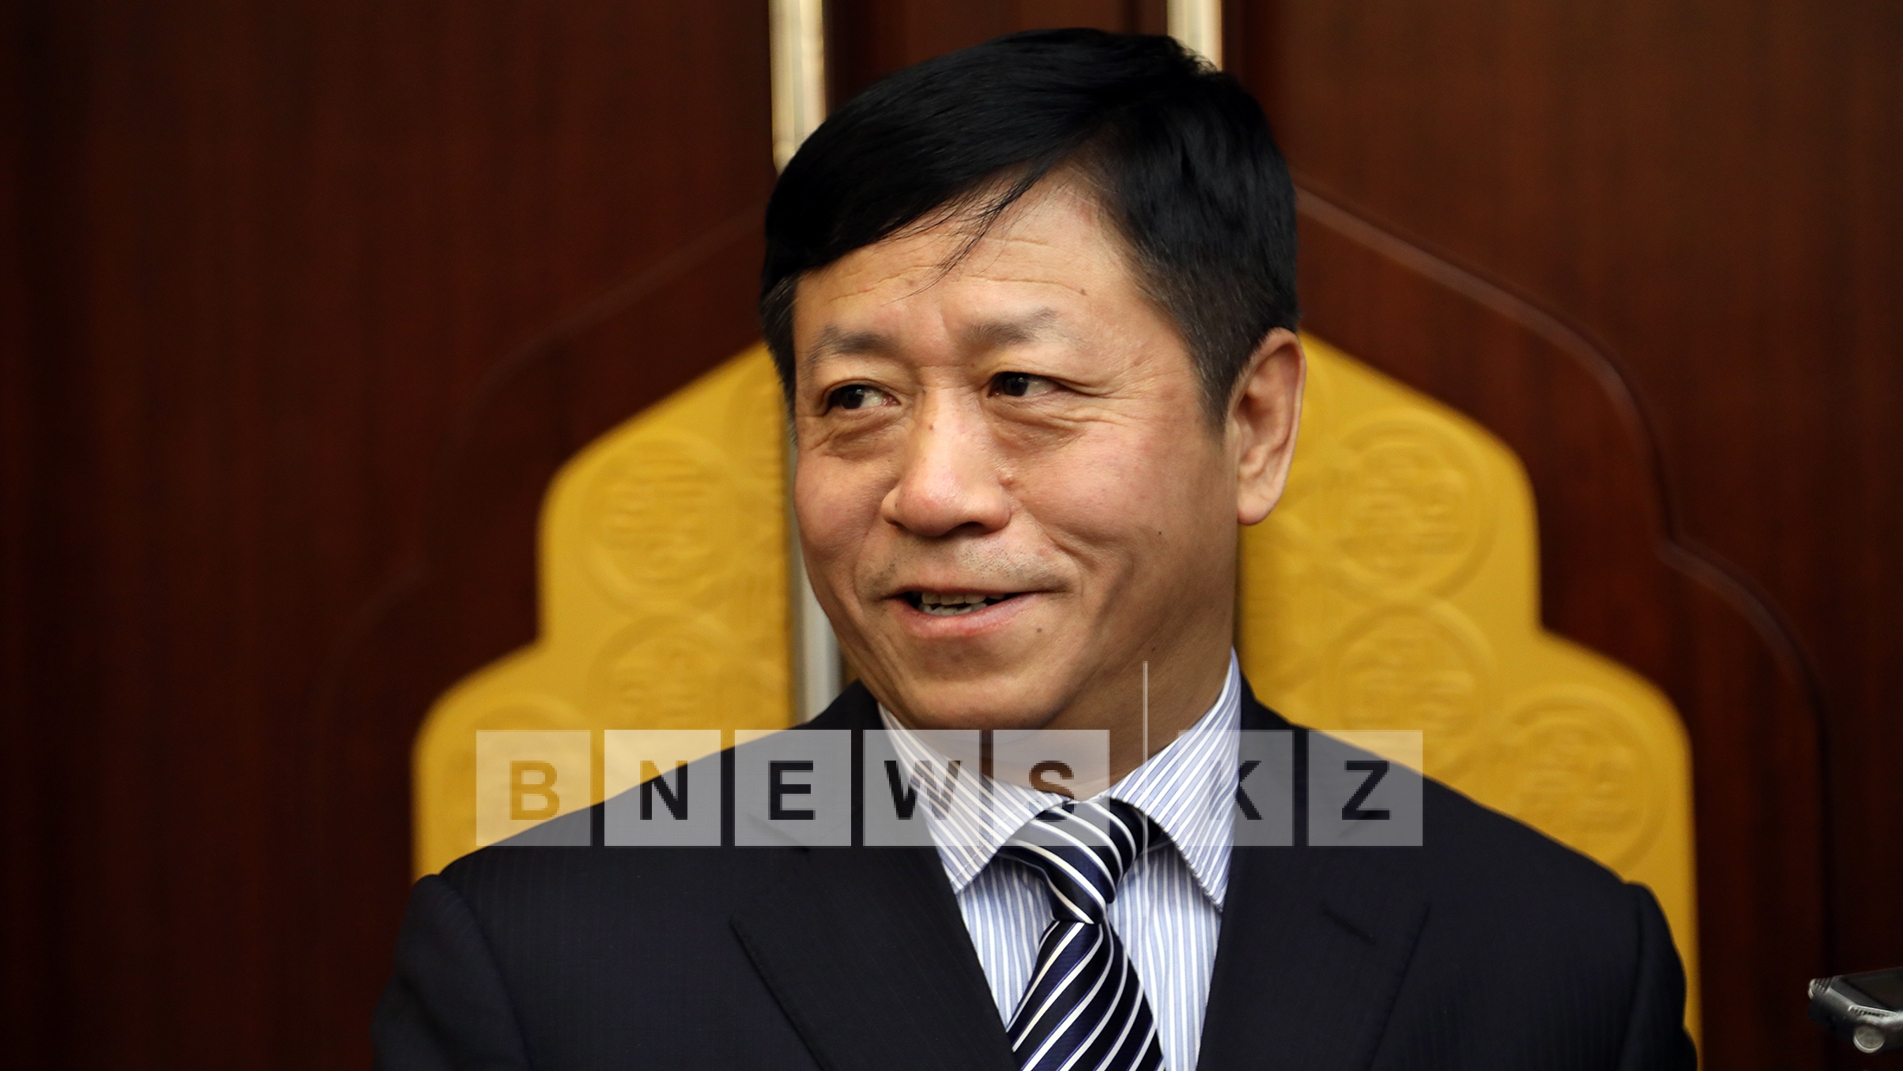 Chinese Ambassador to Kazakhstan: Kazakhstan is the most open country in Central Asia region